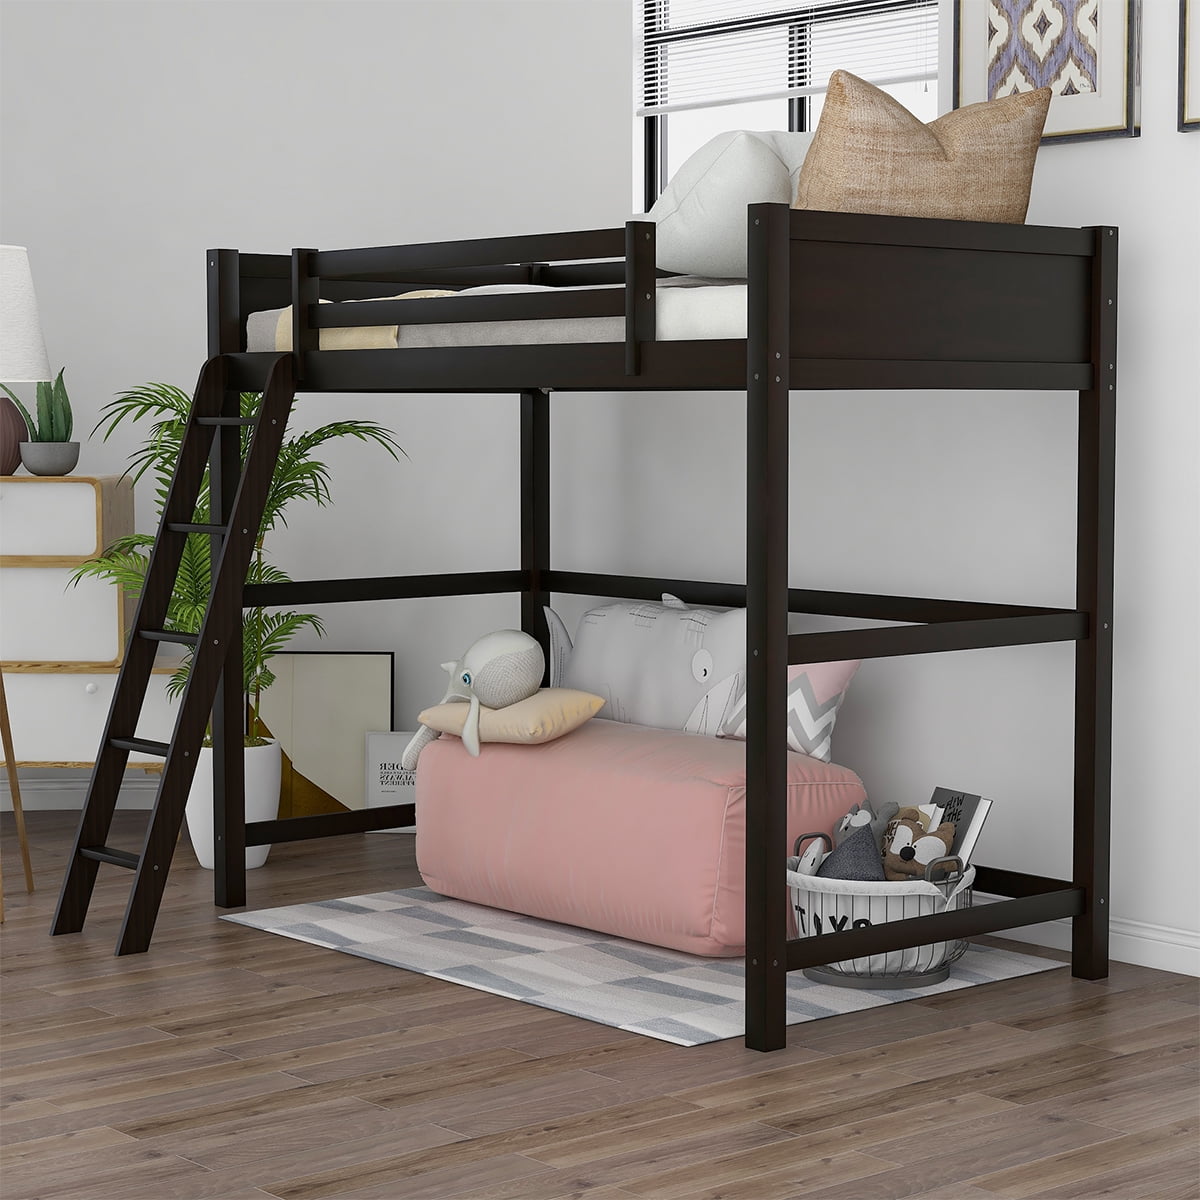 Sentern Solid Wood Twin Loft Bed With, Wood Bunk Bed Ladder Only